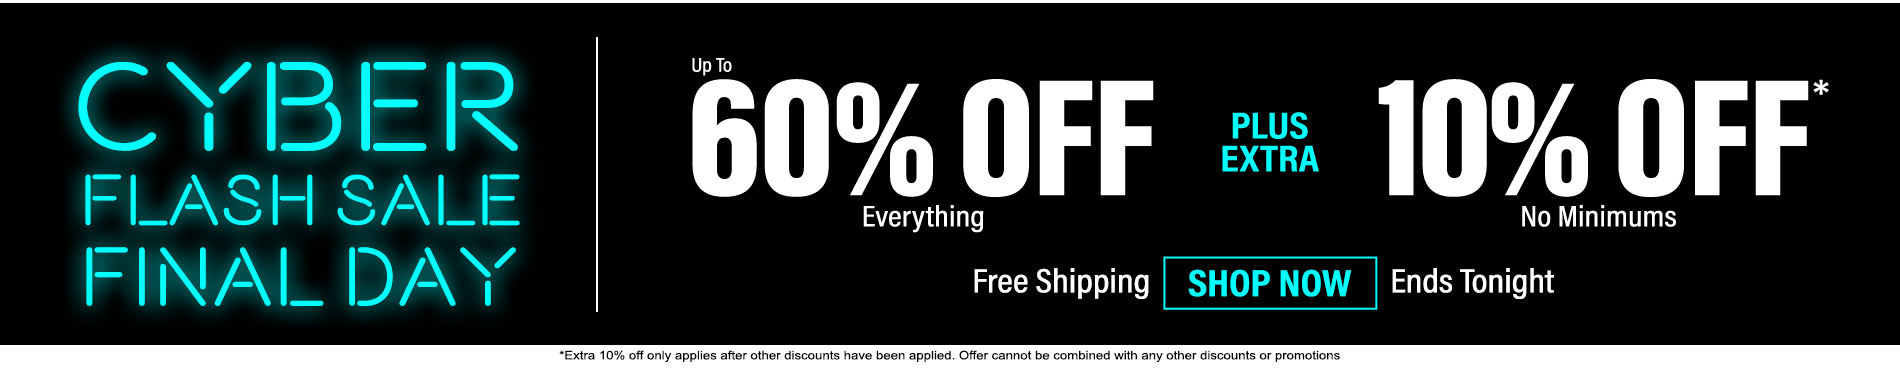 Up to 60% off everything plus extra 10% off no minimums